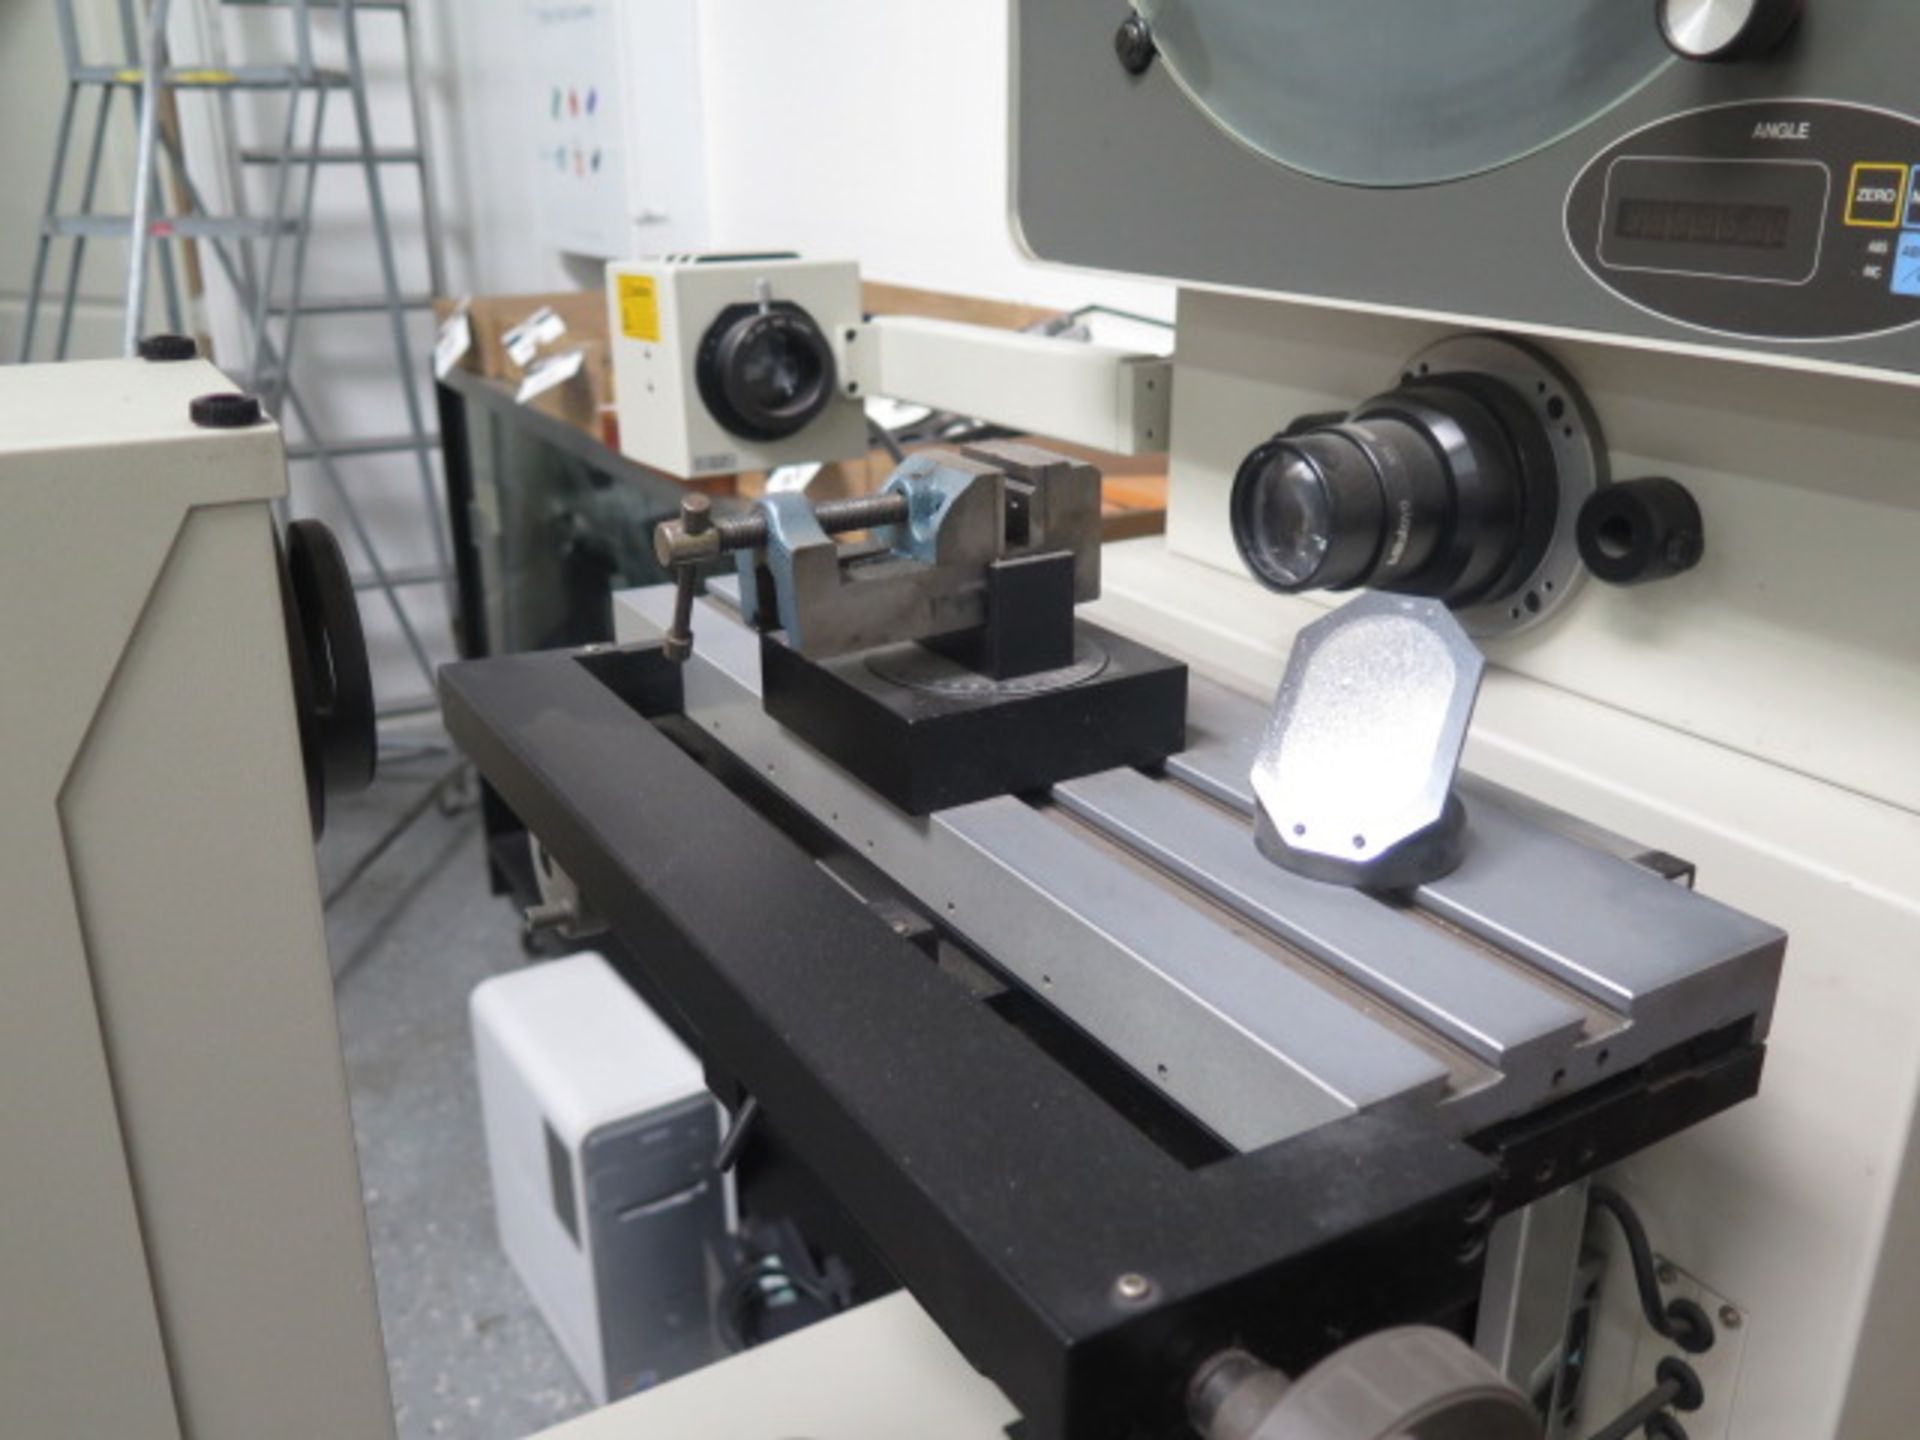 Mitutoyo PH-3500 15” Optical Comparator s/n 750161 w/ Mitutoyo UDR-220 Programmable DRO, Digital - Image 4 of 13